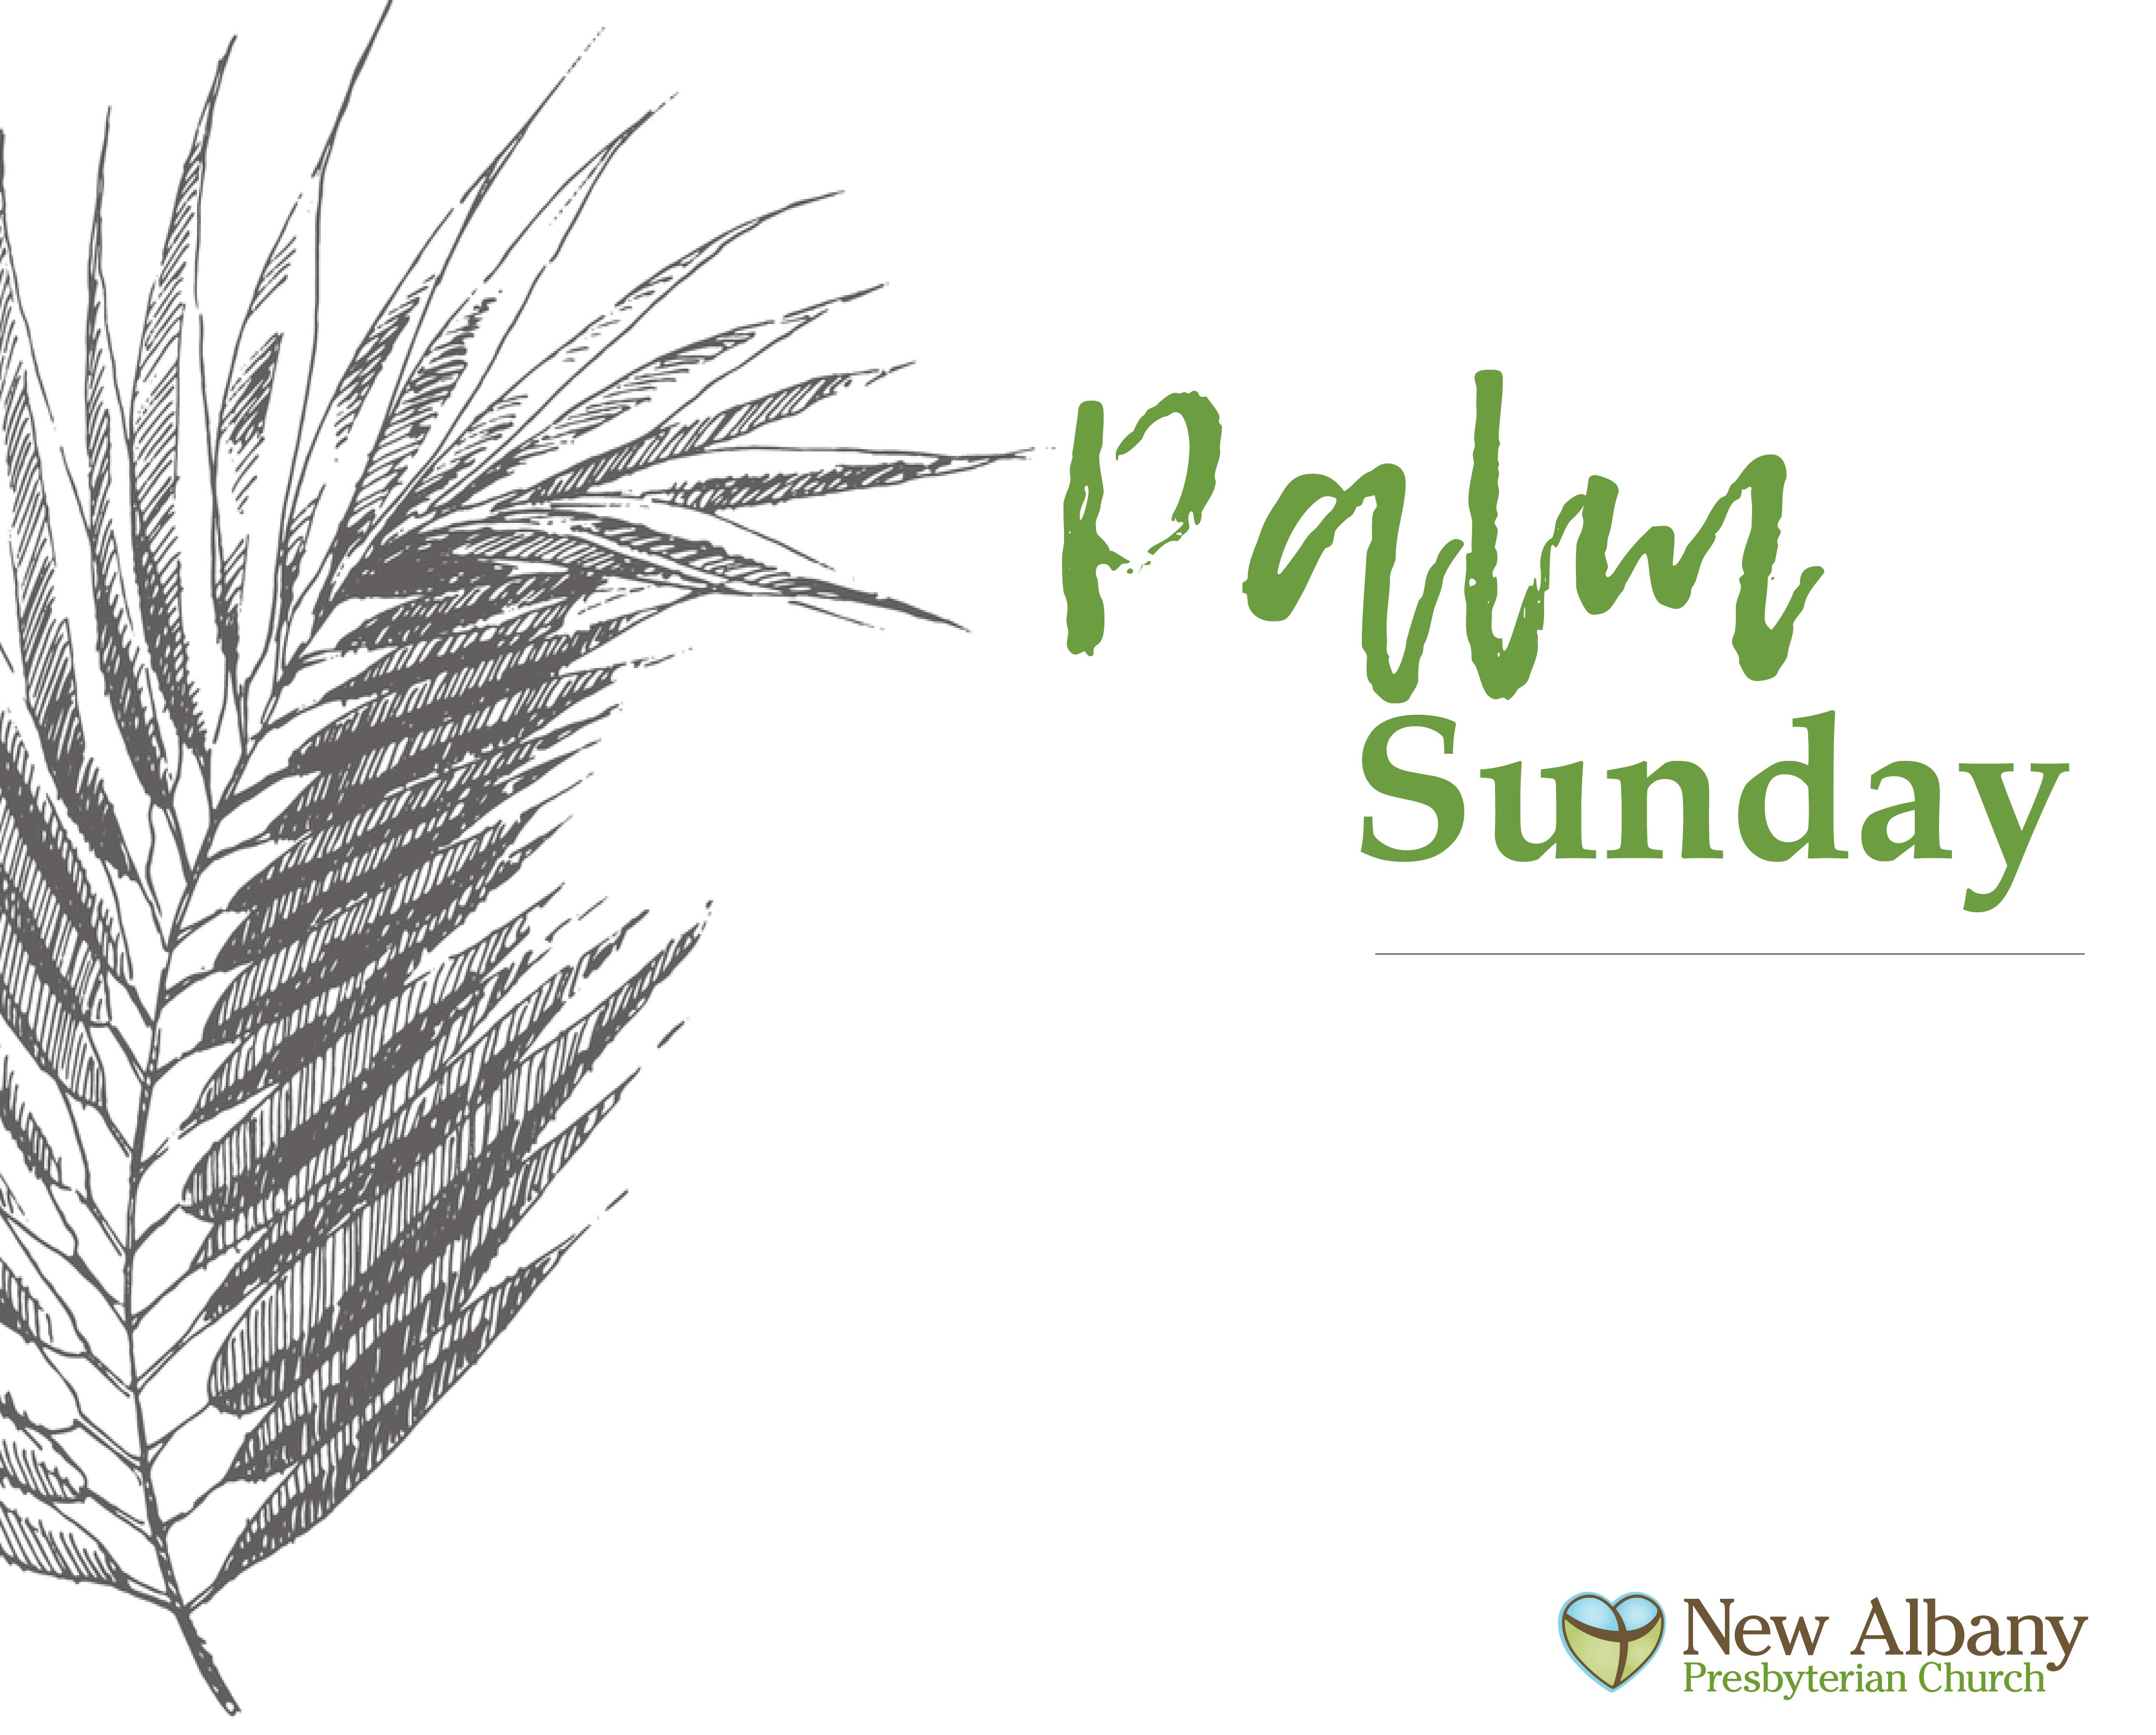 Palm Sunday – The Victorious Failure